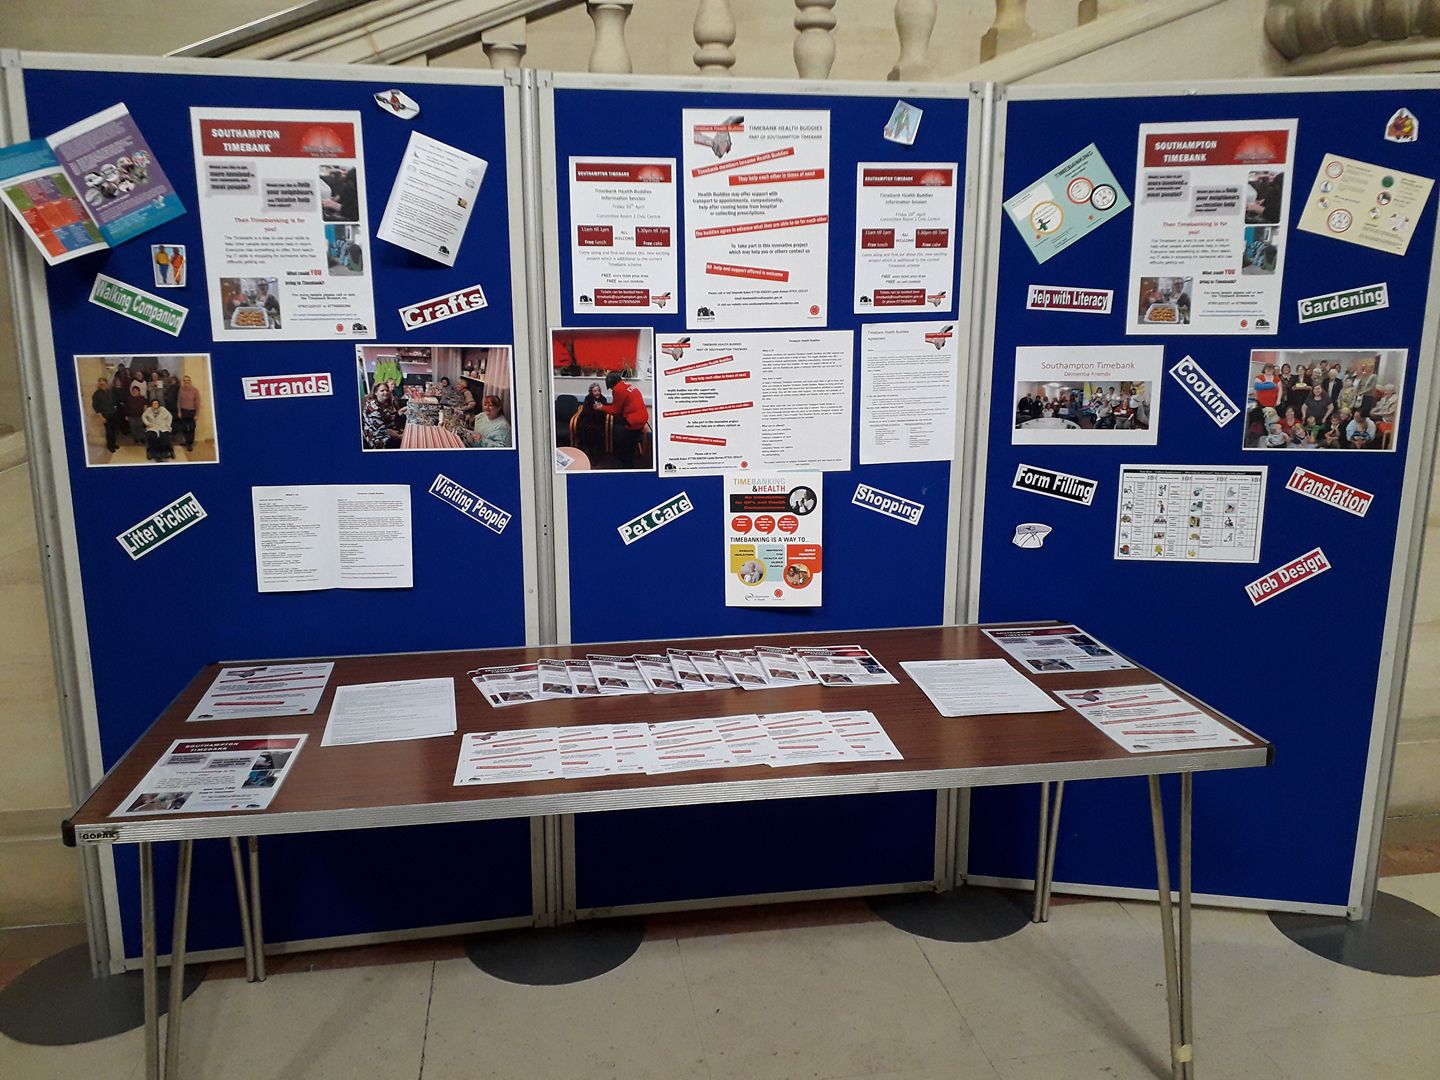 Promoting the Timebank @ Civic Centre